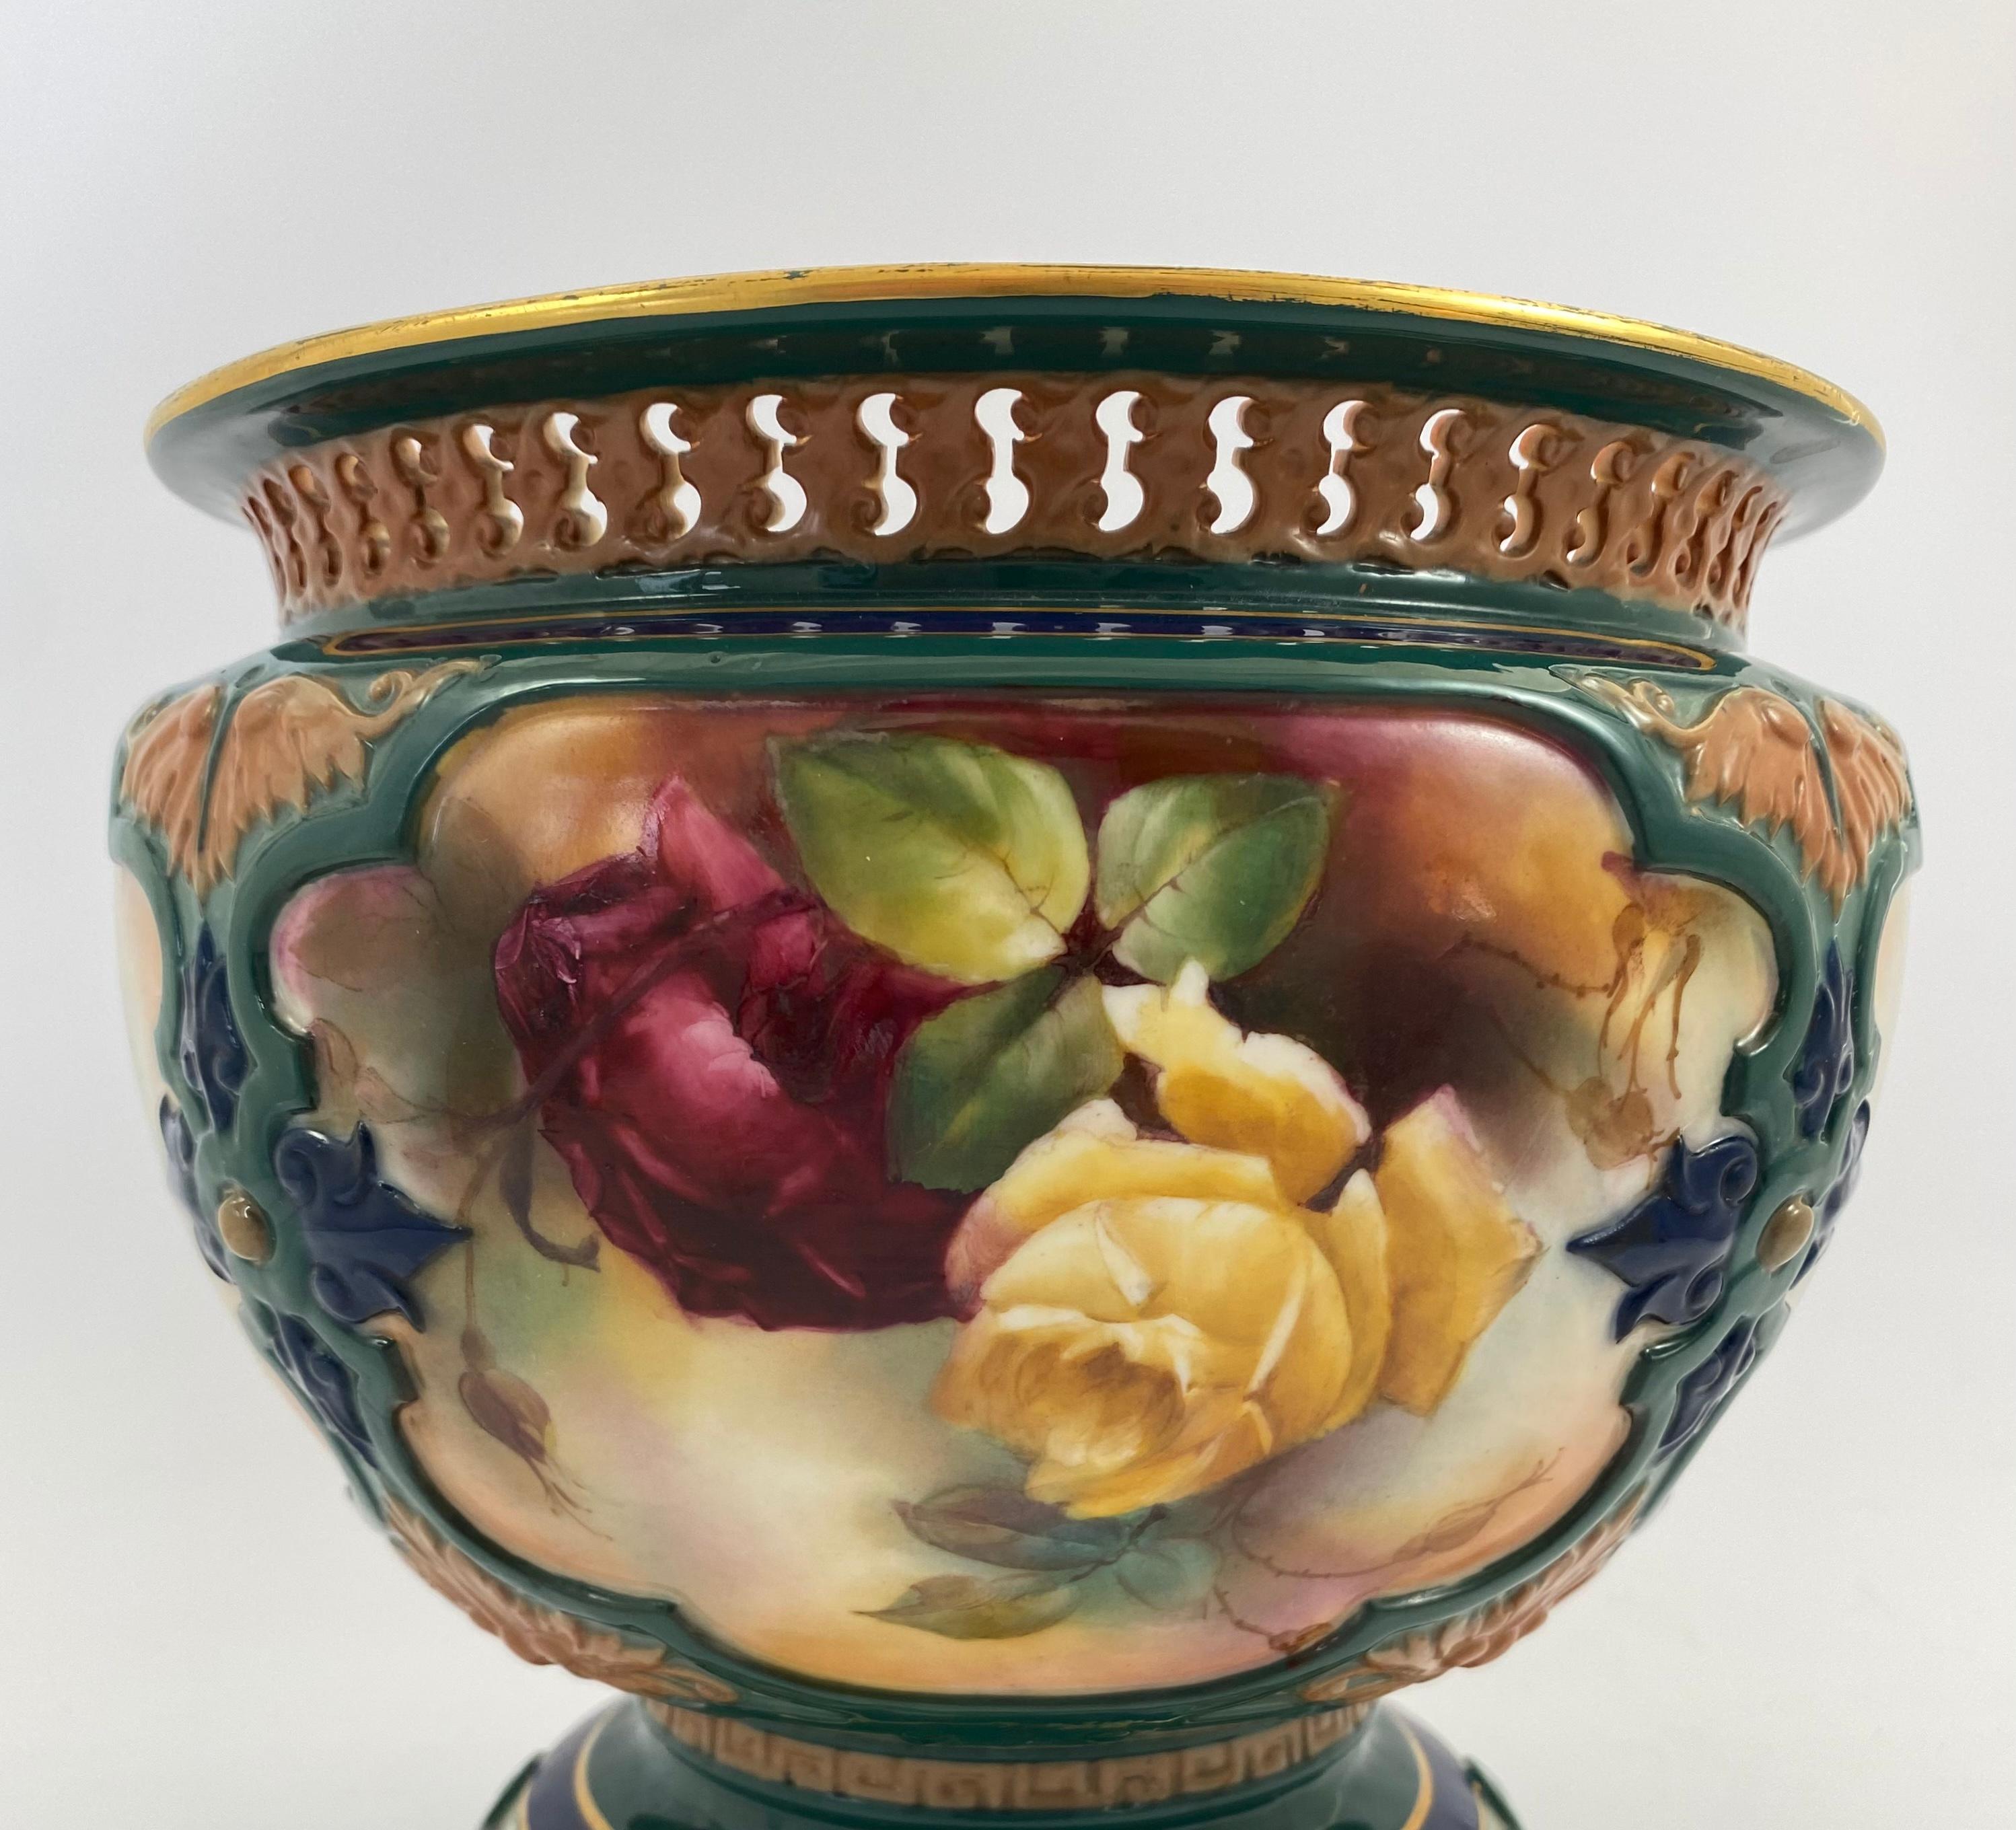 Fired Royal Worcester Porcelain Jardiniere, ‘Roses’, Dated 1907